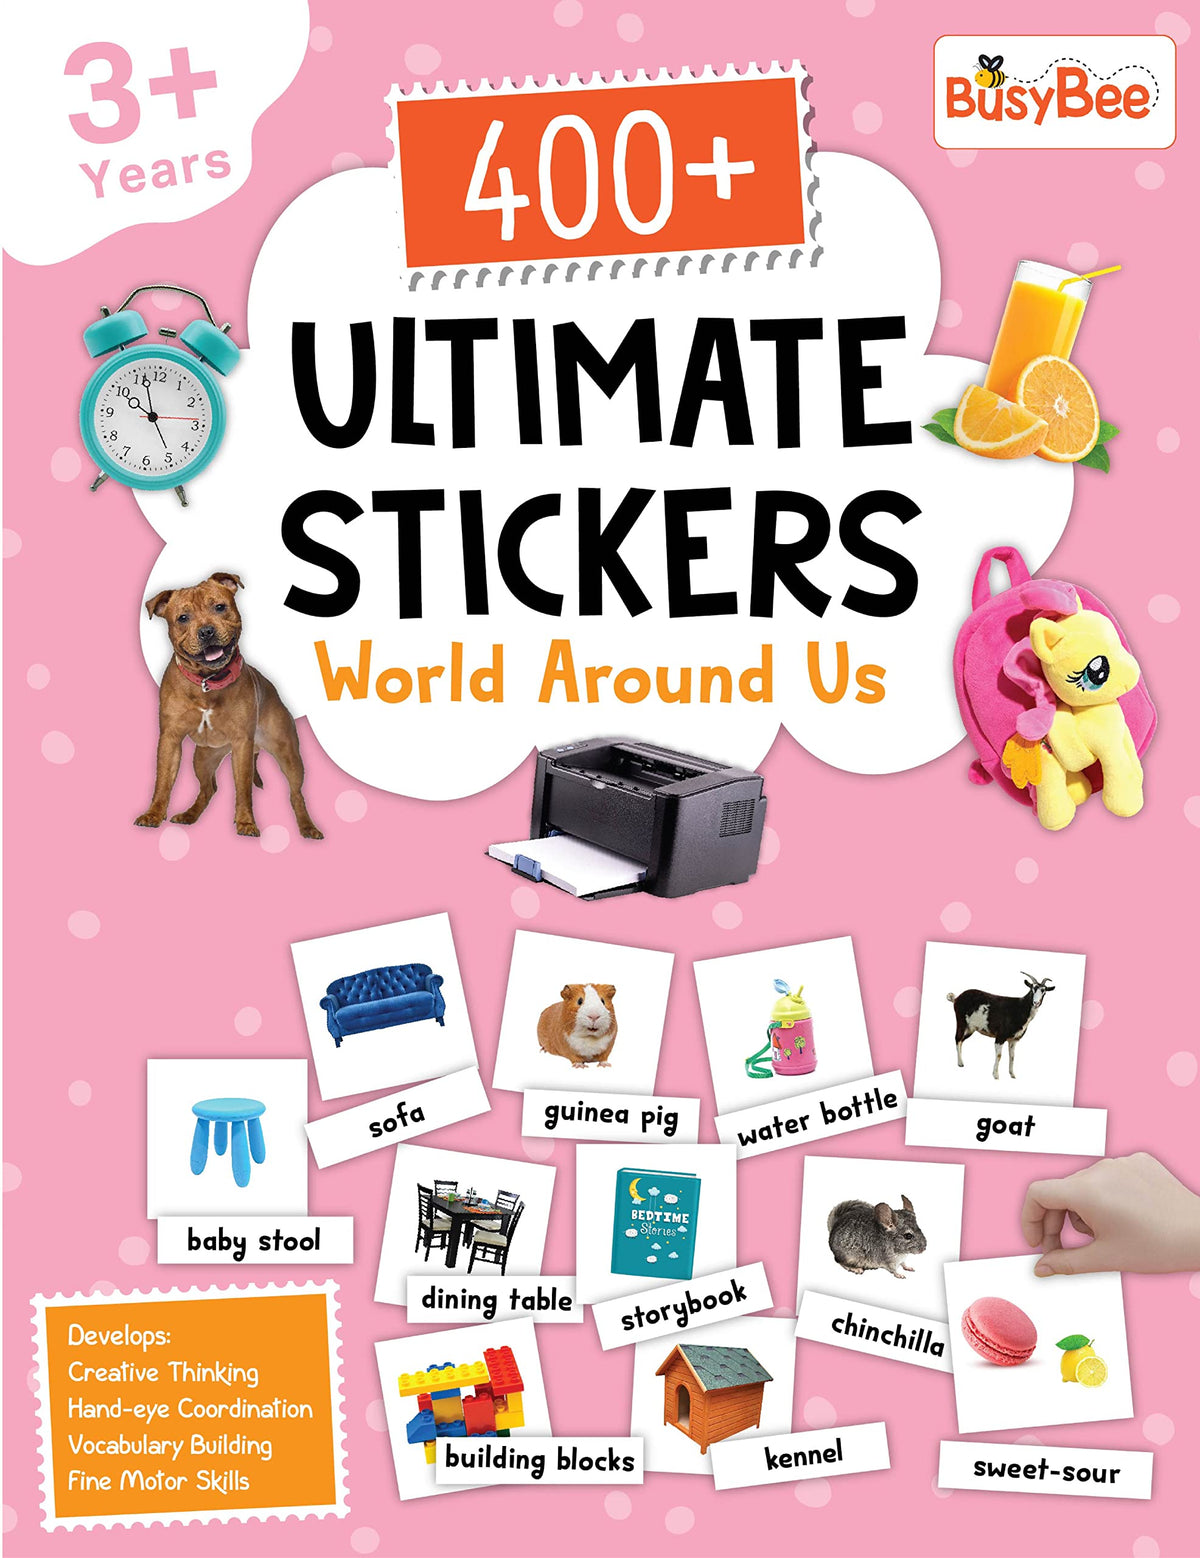 Pegasus 400+ Ultimate Stickers Book - World Around Us for 3+ Years Kids